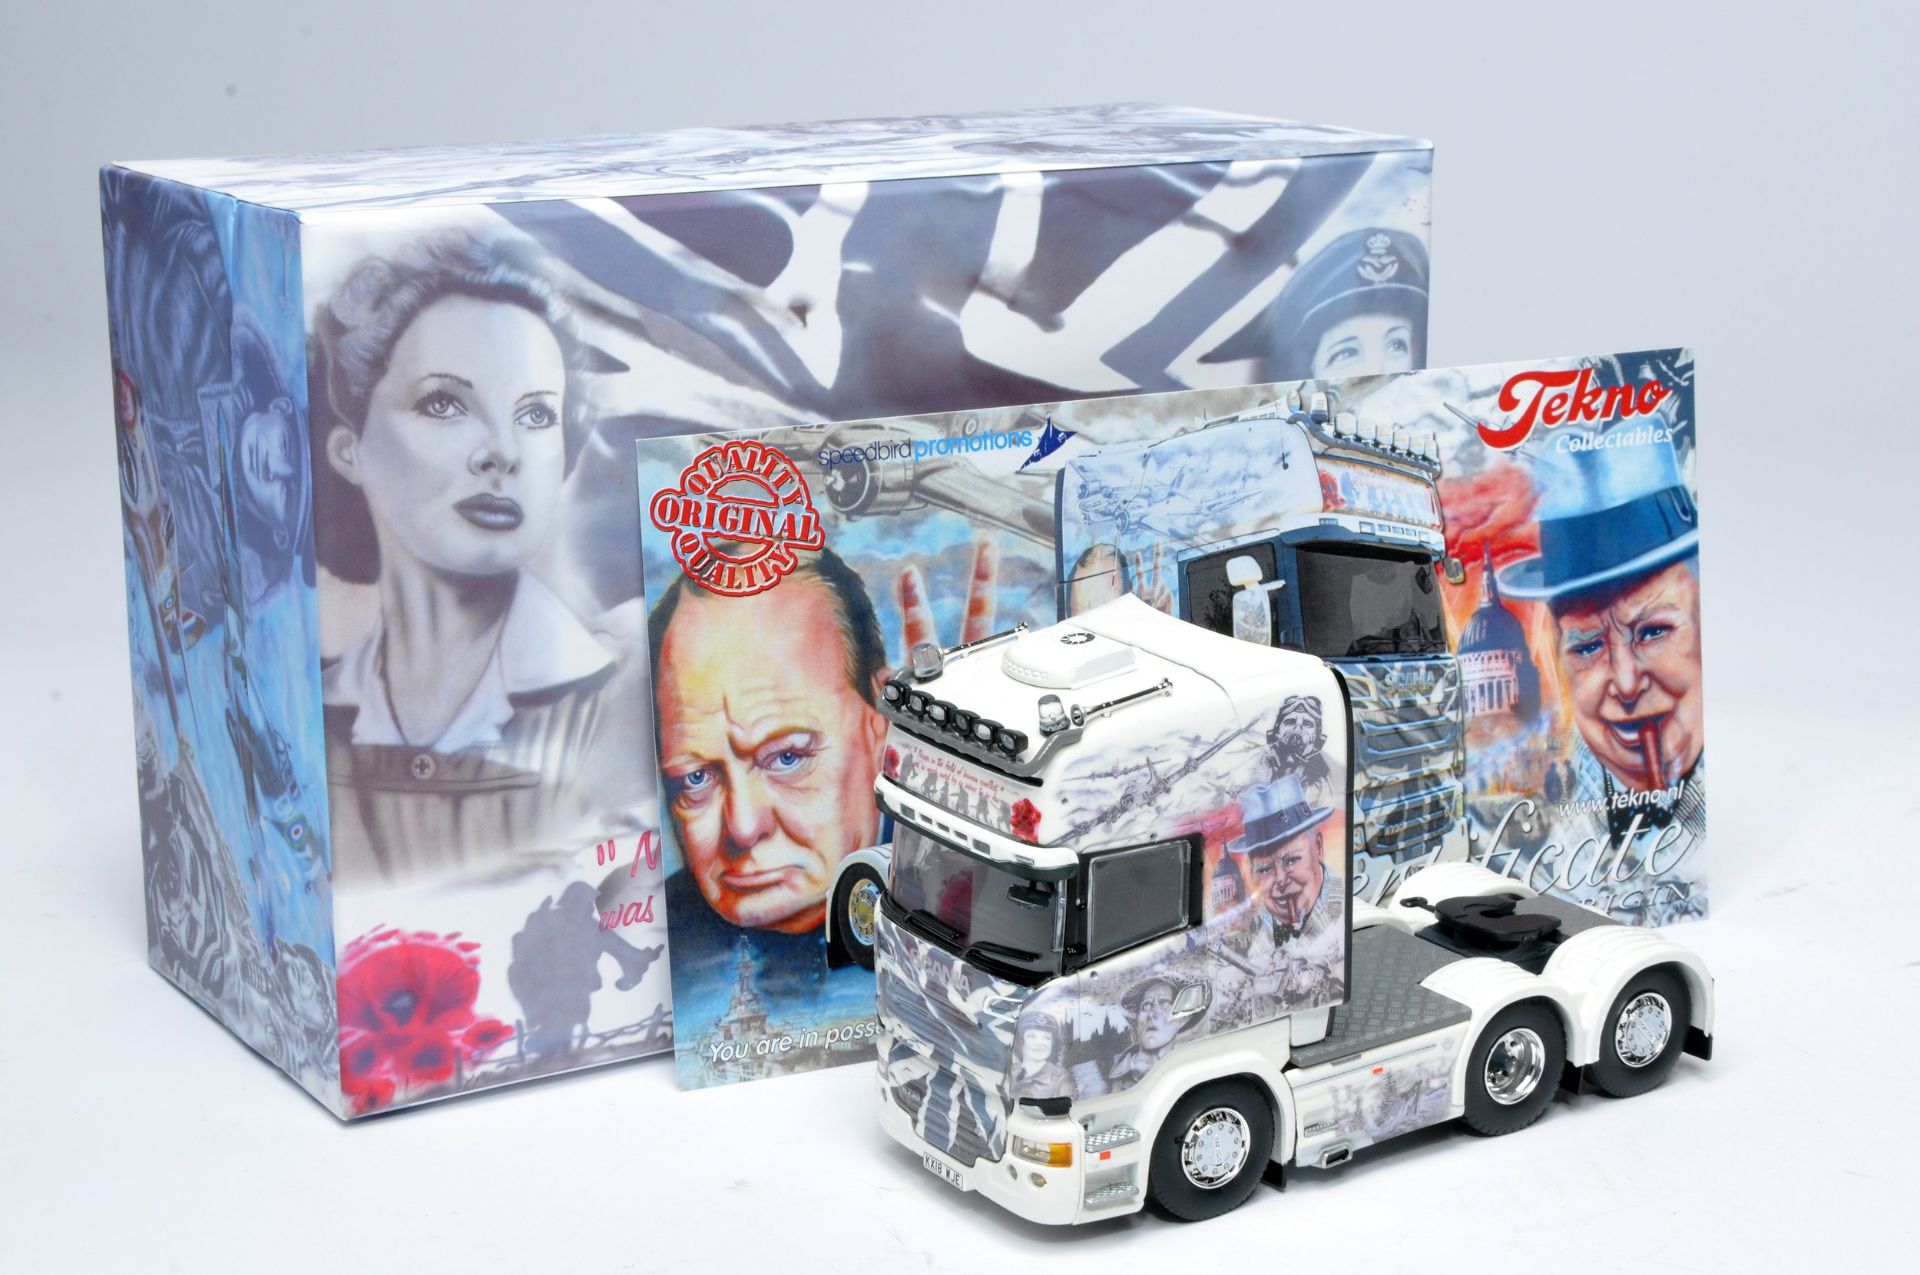 Tekno 1/50 diecast model truck issue comprising Scania World War 2 Edition. Limited Edition of 200